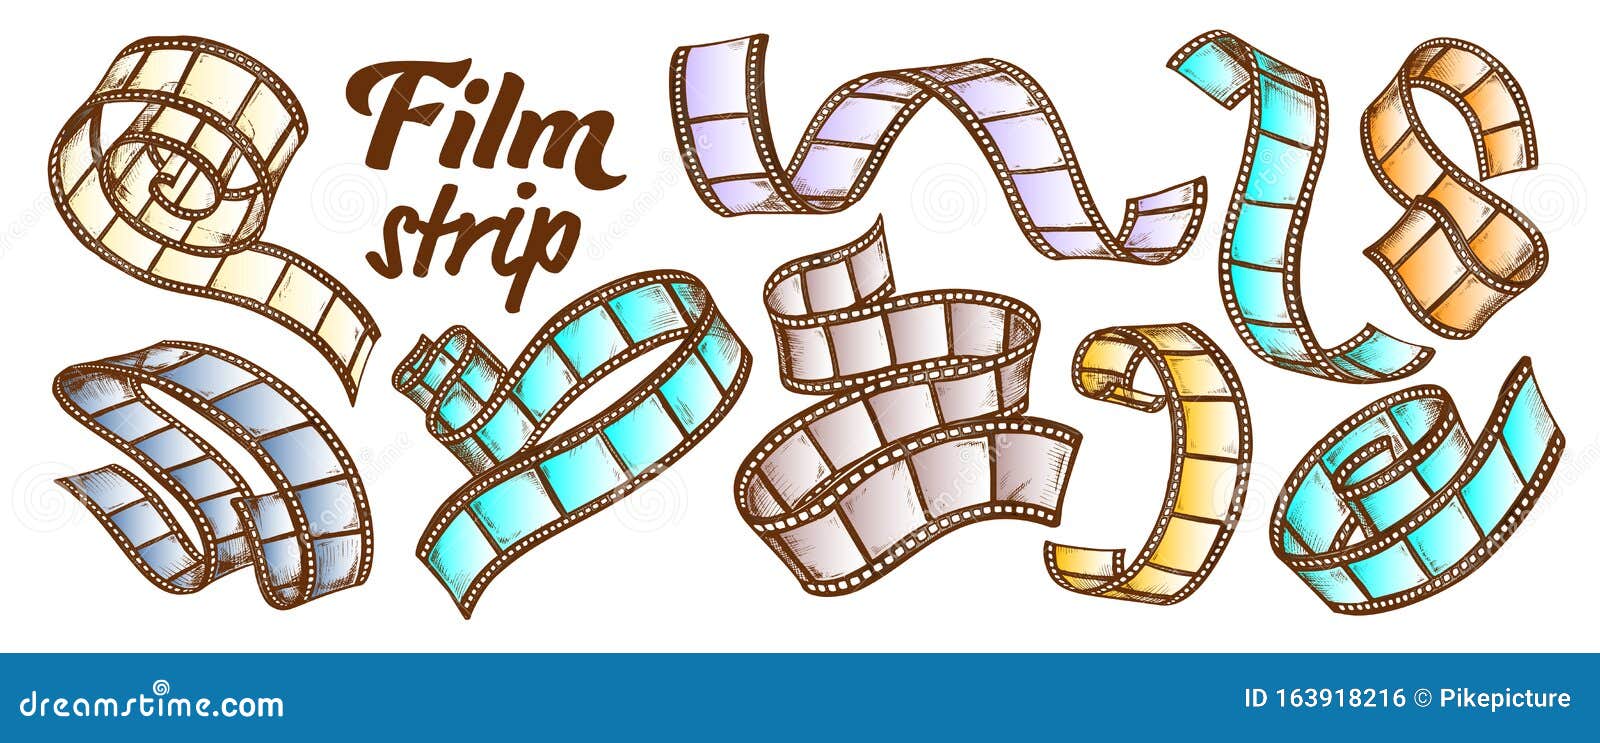 https://thumbs.dreamstime.com/z/film-strip-camera-projector-set-vector-collection-blank-old-film-reel-ribbon-spiral-curl-twisted-engraving-163918216.jpg